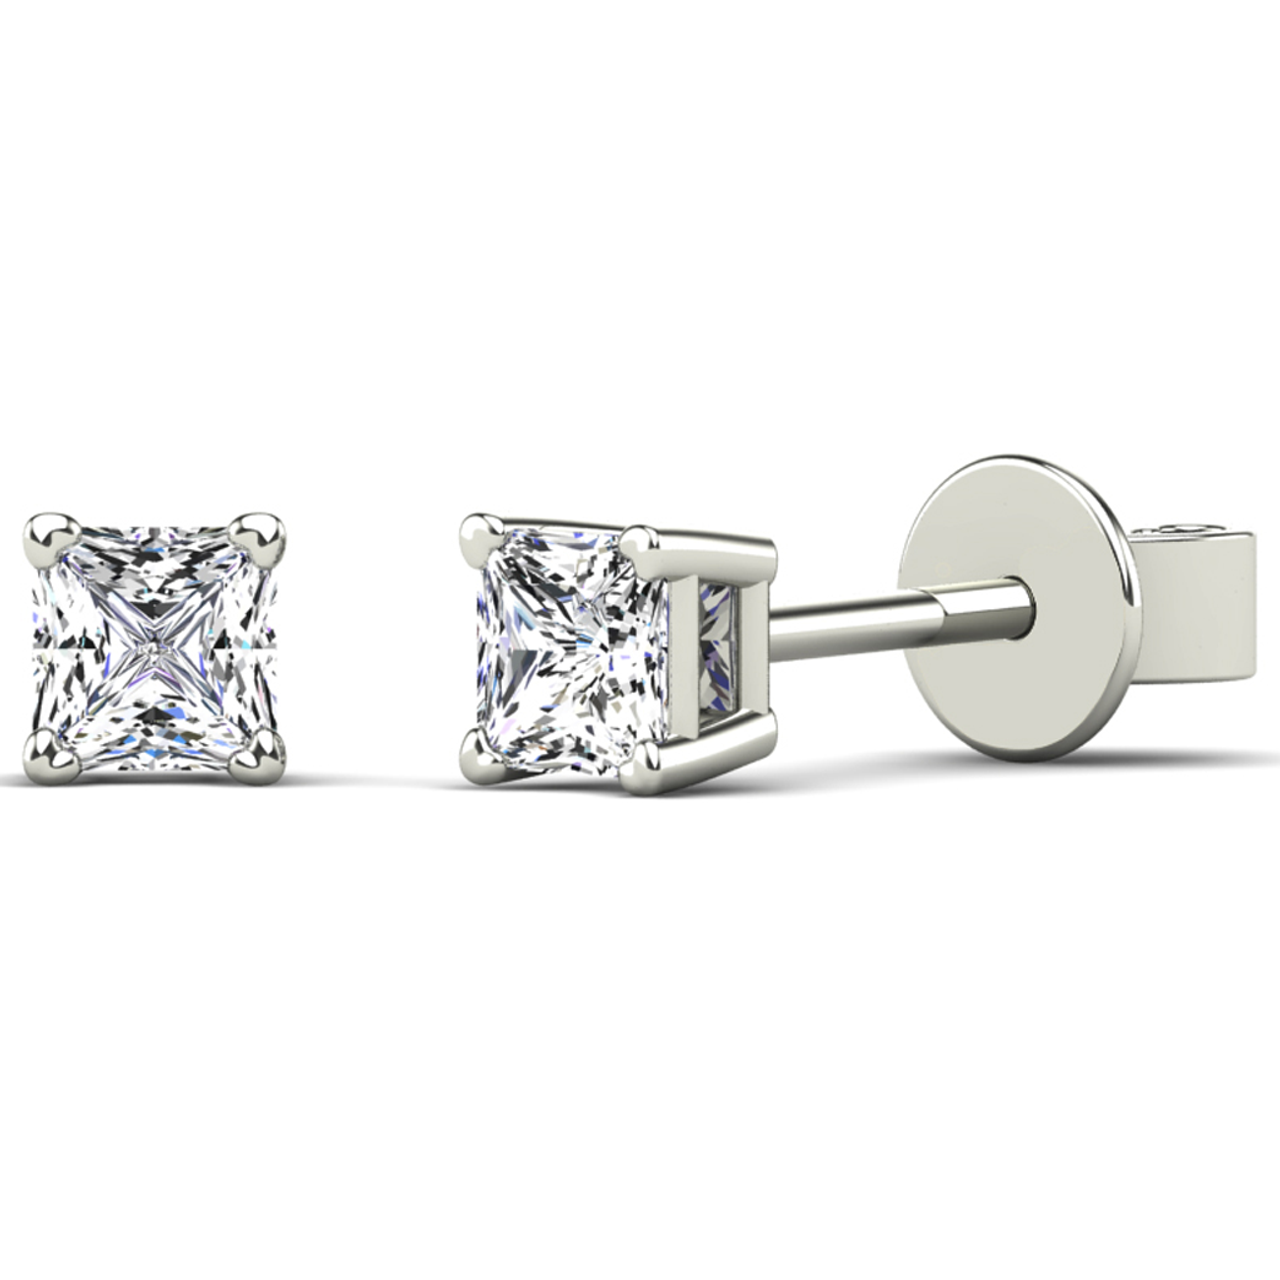 10K White Gold Princess Cut 1/6CT Diamond Solitaire Earrings product image